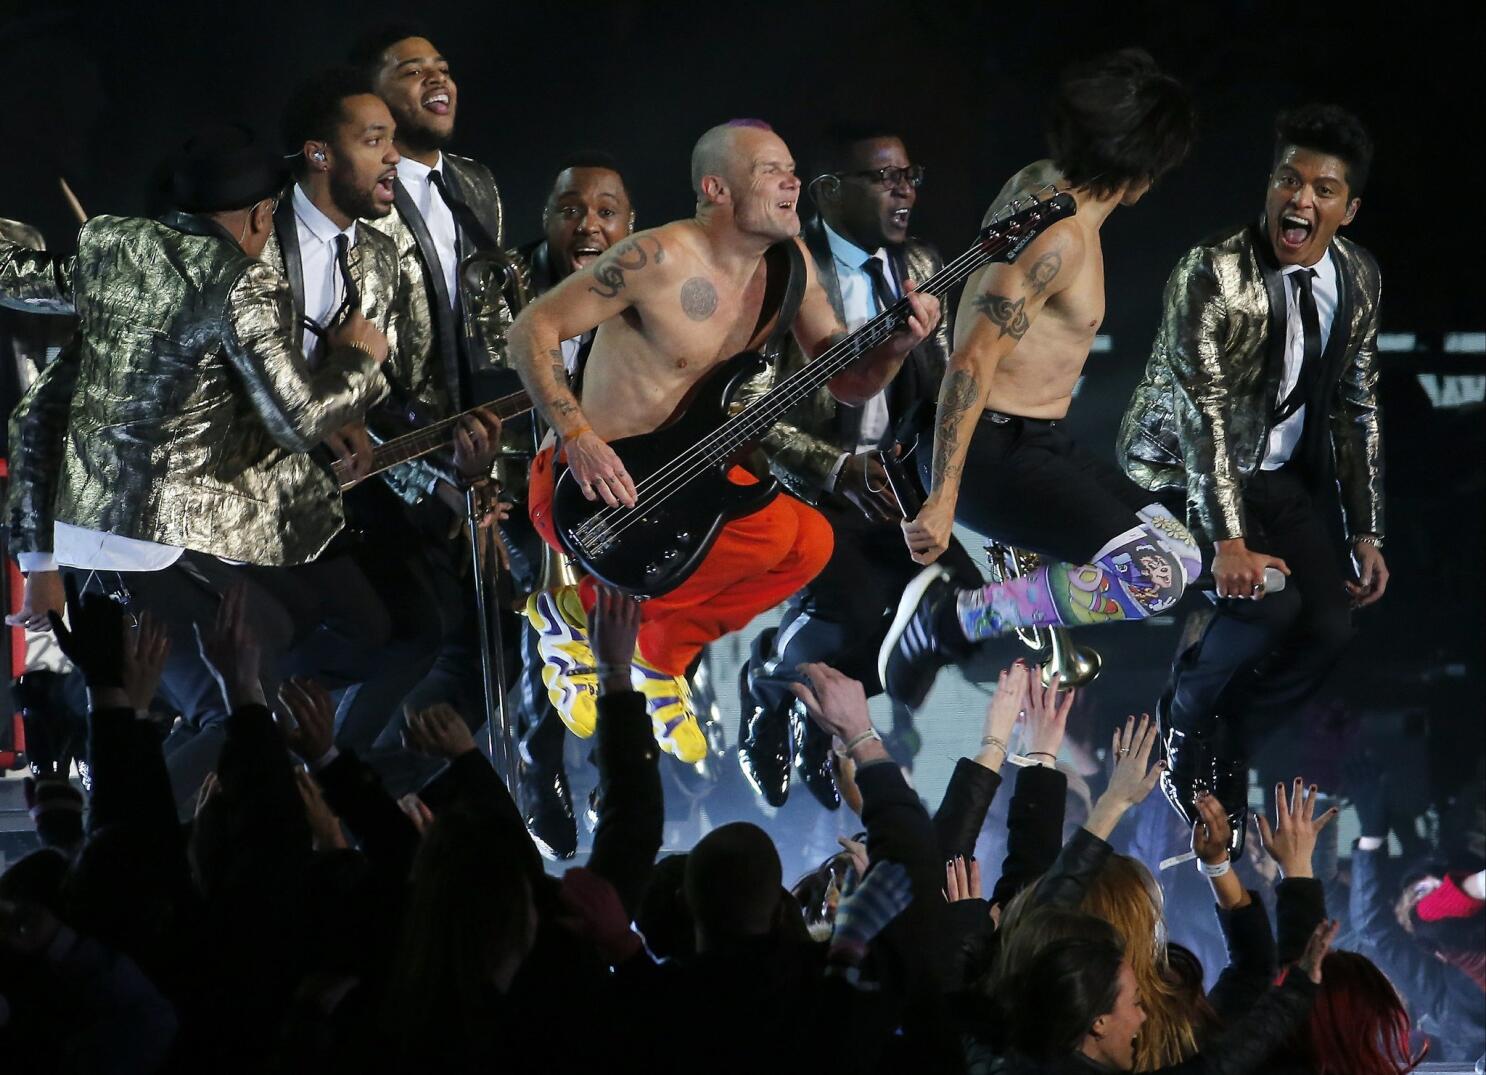 Super Bowl halftime show mostly pre-recorded - The San Diego Union-Tribune